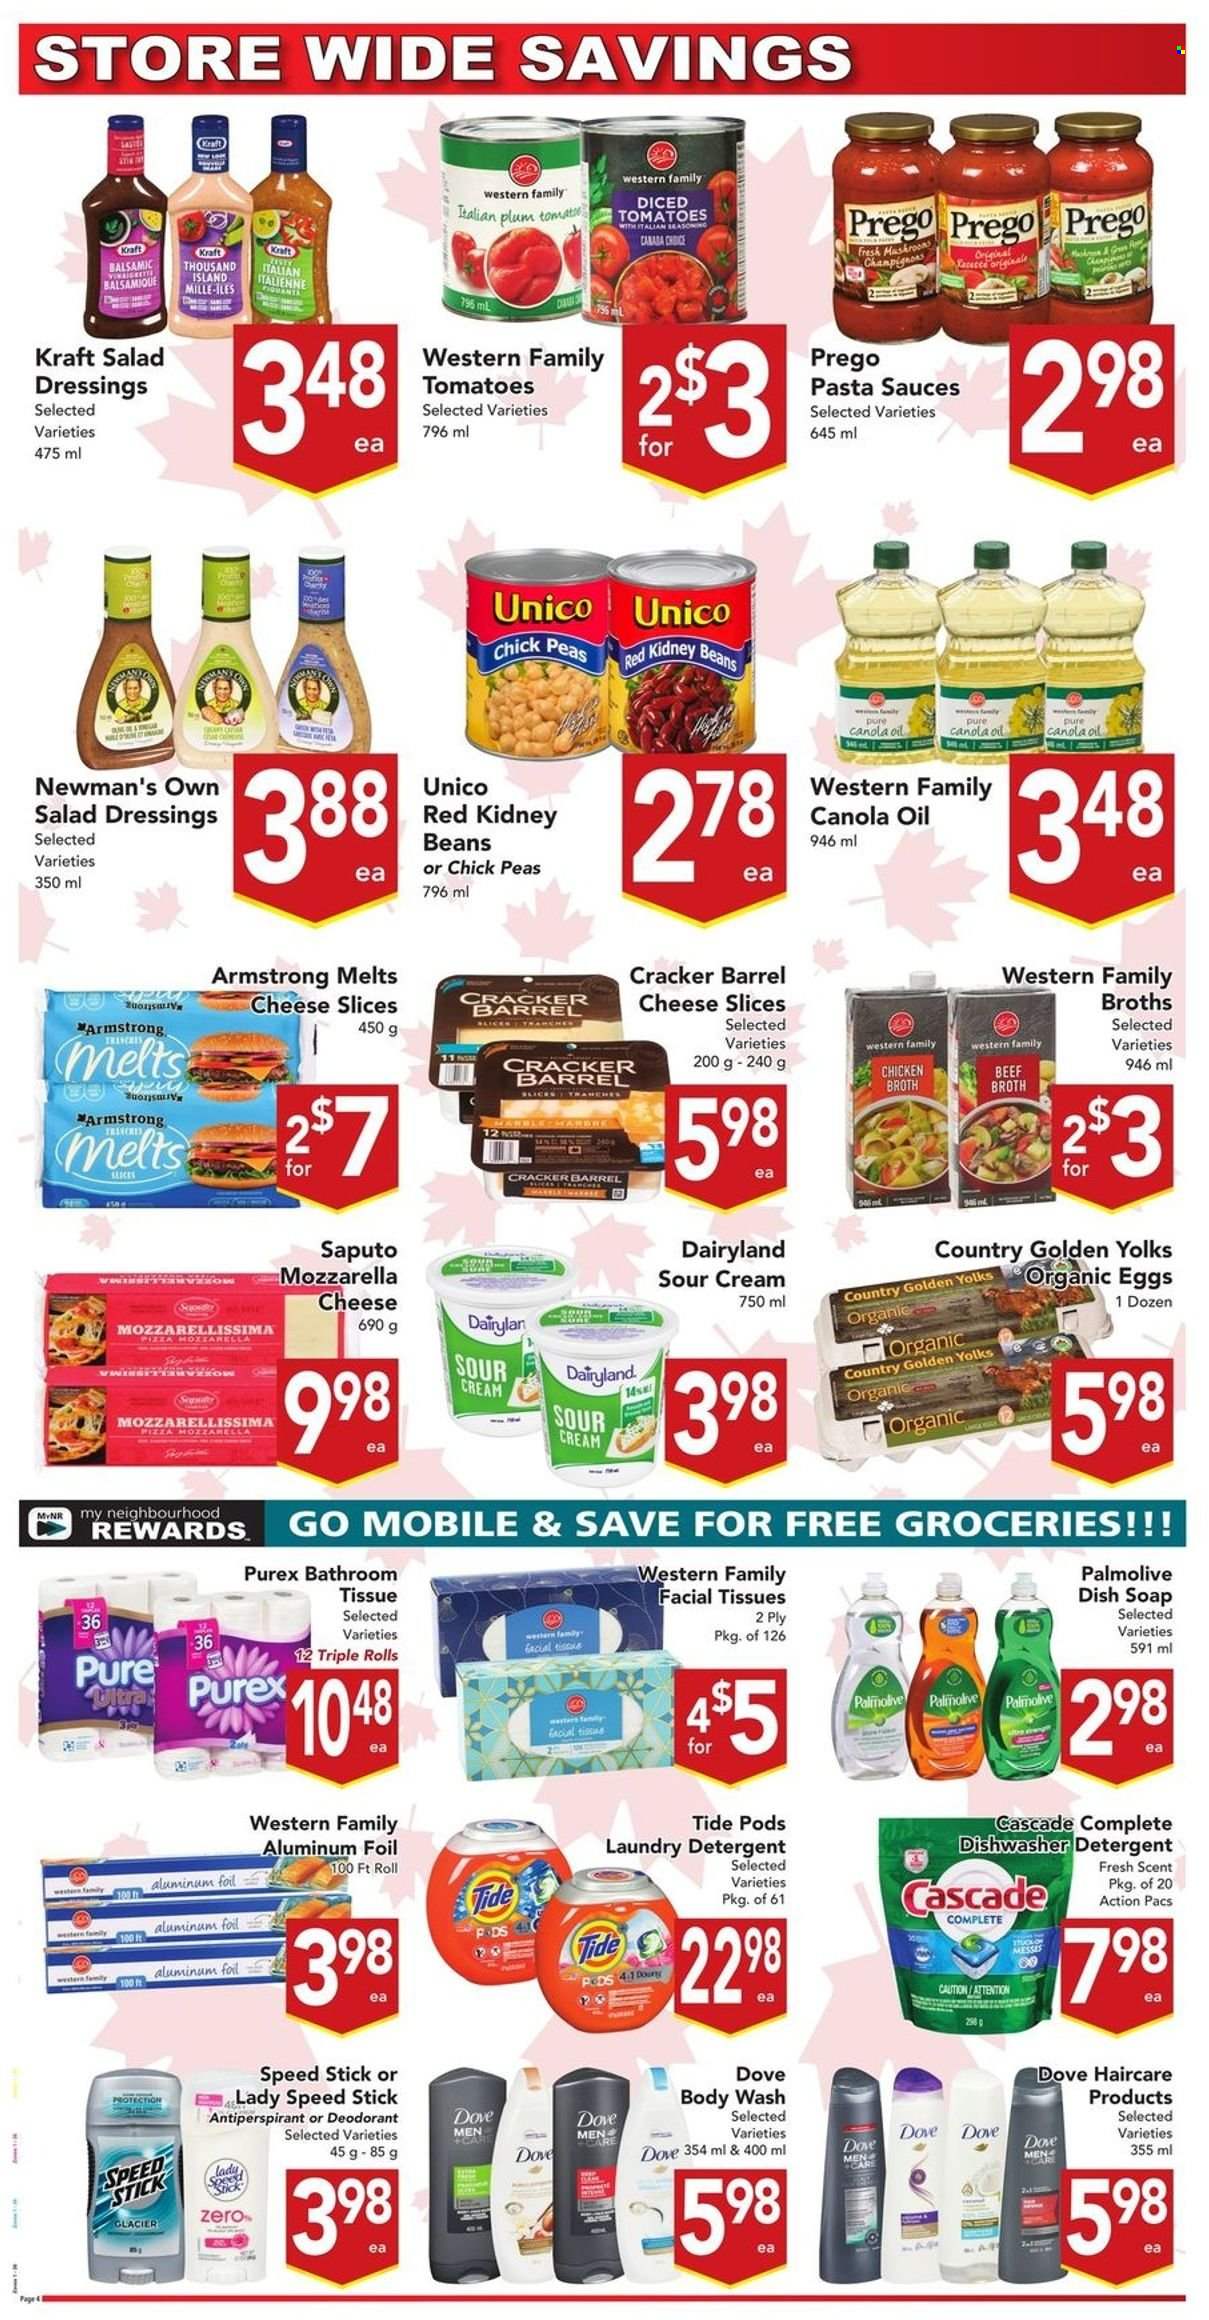 thumbnail - Buy-Low Foods Flyer - June 26, 2022 - July 02, 2022 - Sales products - beans, peas, pizza, pasta, Kraft®, sliced cheese, eggs, sour cream, Thousand Island dressing, crackers, beef broth, chicken broth, broth, kidney beans, diced tomatoes, spice, salad dressing, canola oil, bath tissue, Tide, laundry detergent, Cascade, Purex, body wash, Palmolive, soap, facial tissues, anti-perspirant, Speed Stick, detergent, Dove, deodorant. Page 5.